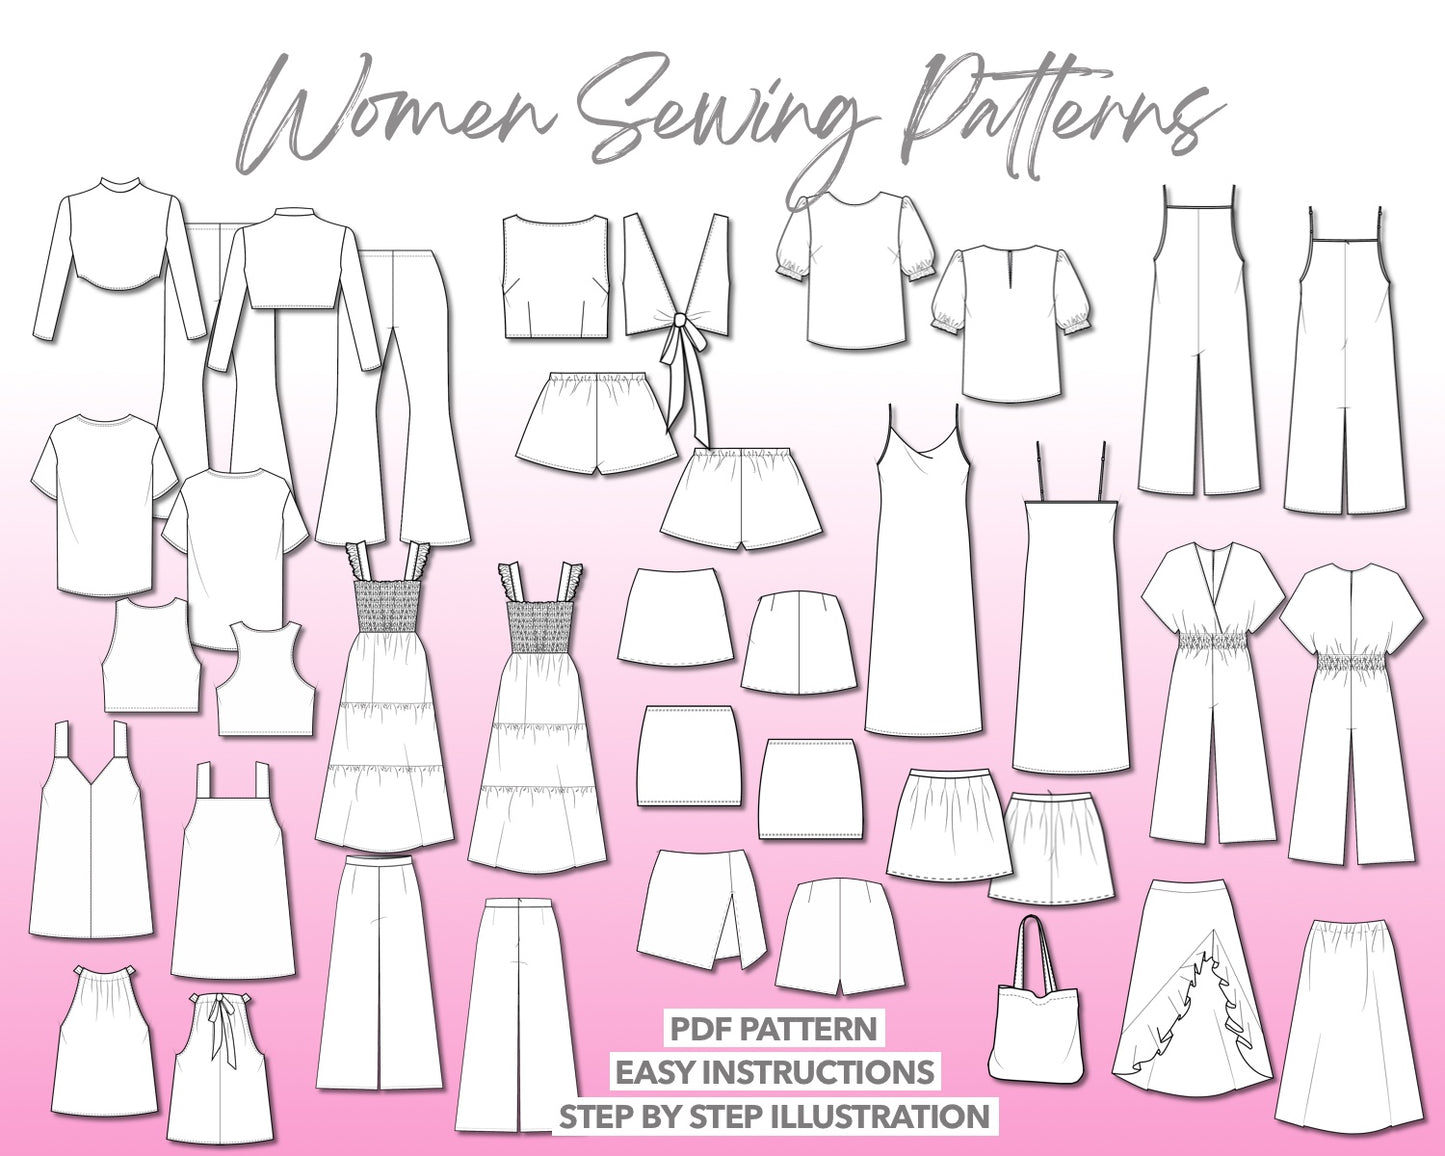 Illustration and detailed description for sewing patterns